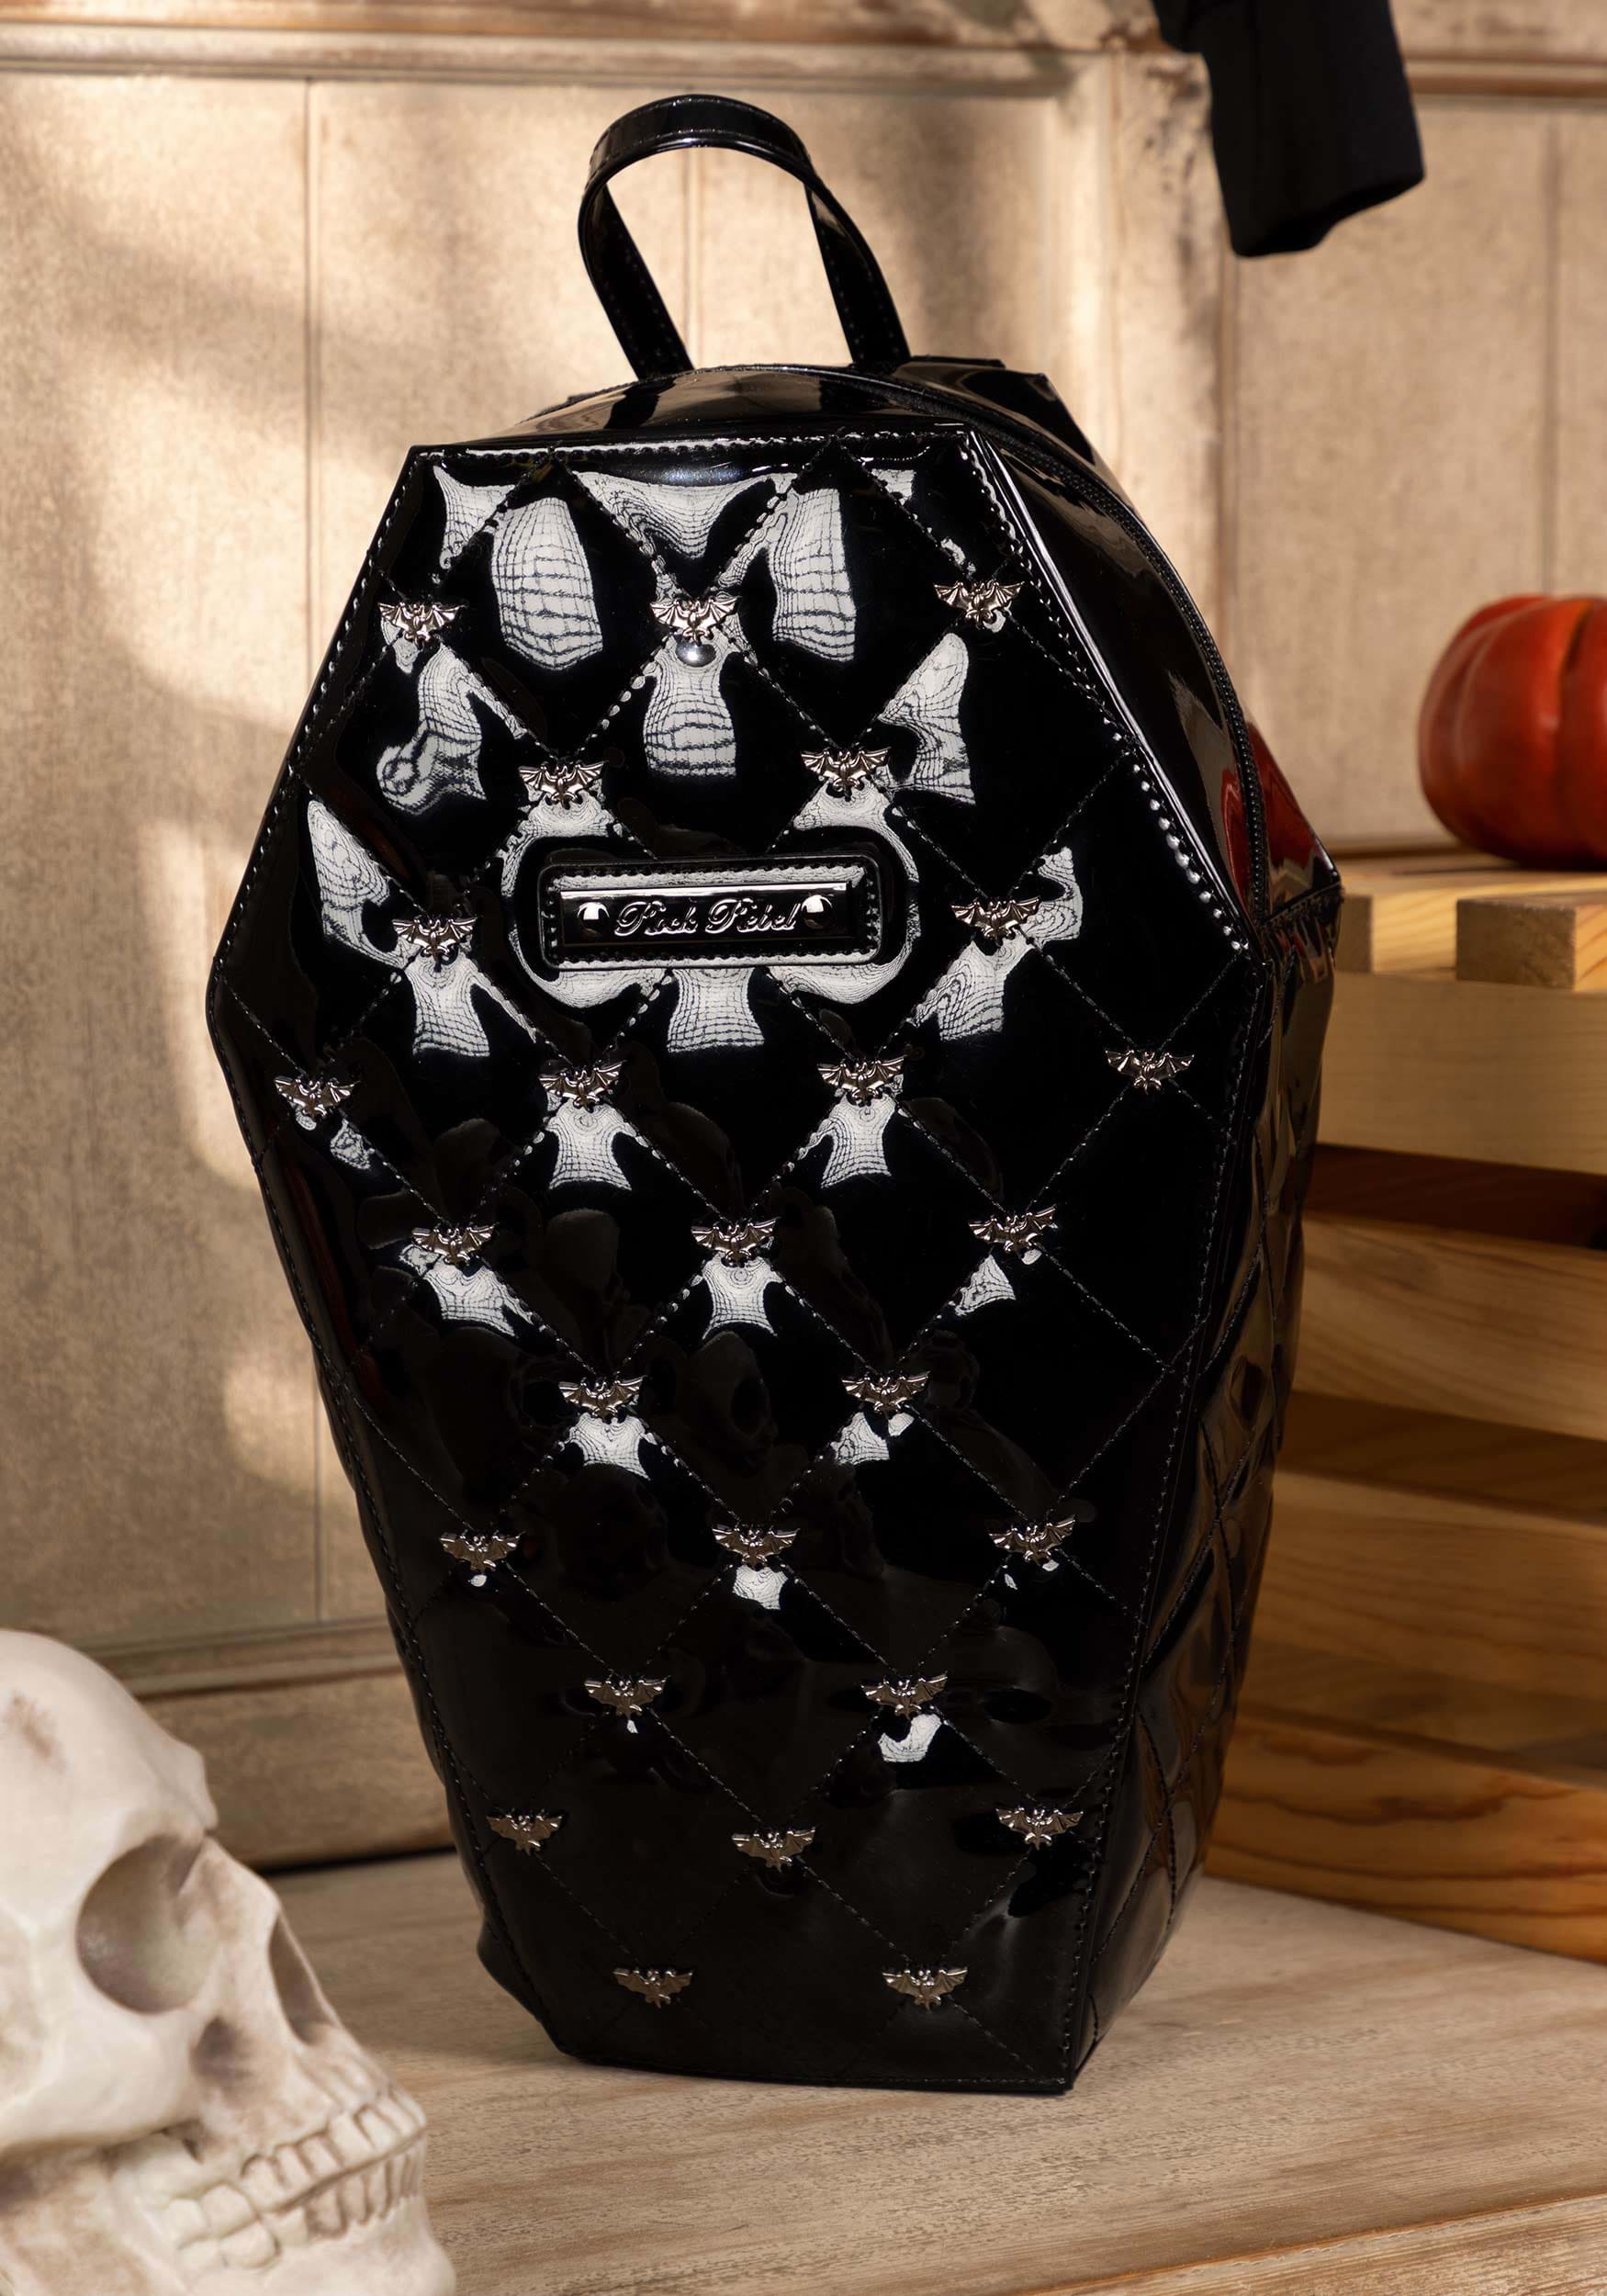 https://images.halloweencostumes.com/products/82381/1-1/black-bat-studded-quilted-patent-coffin-backpack.jpg